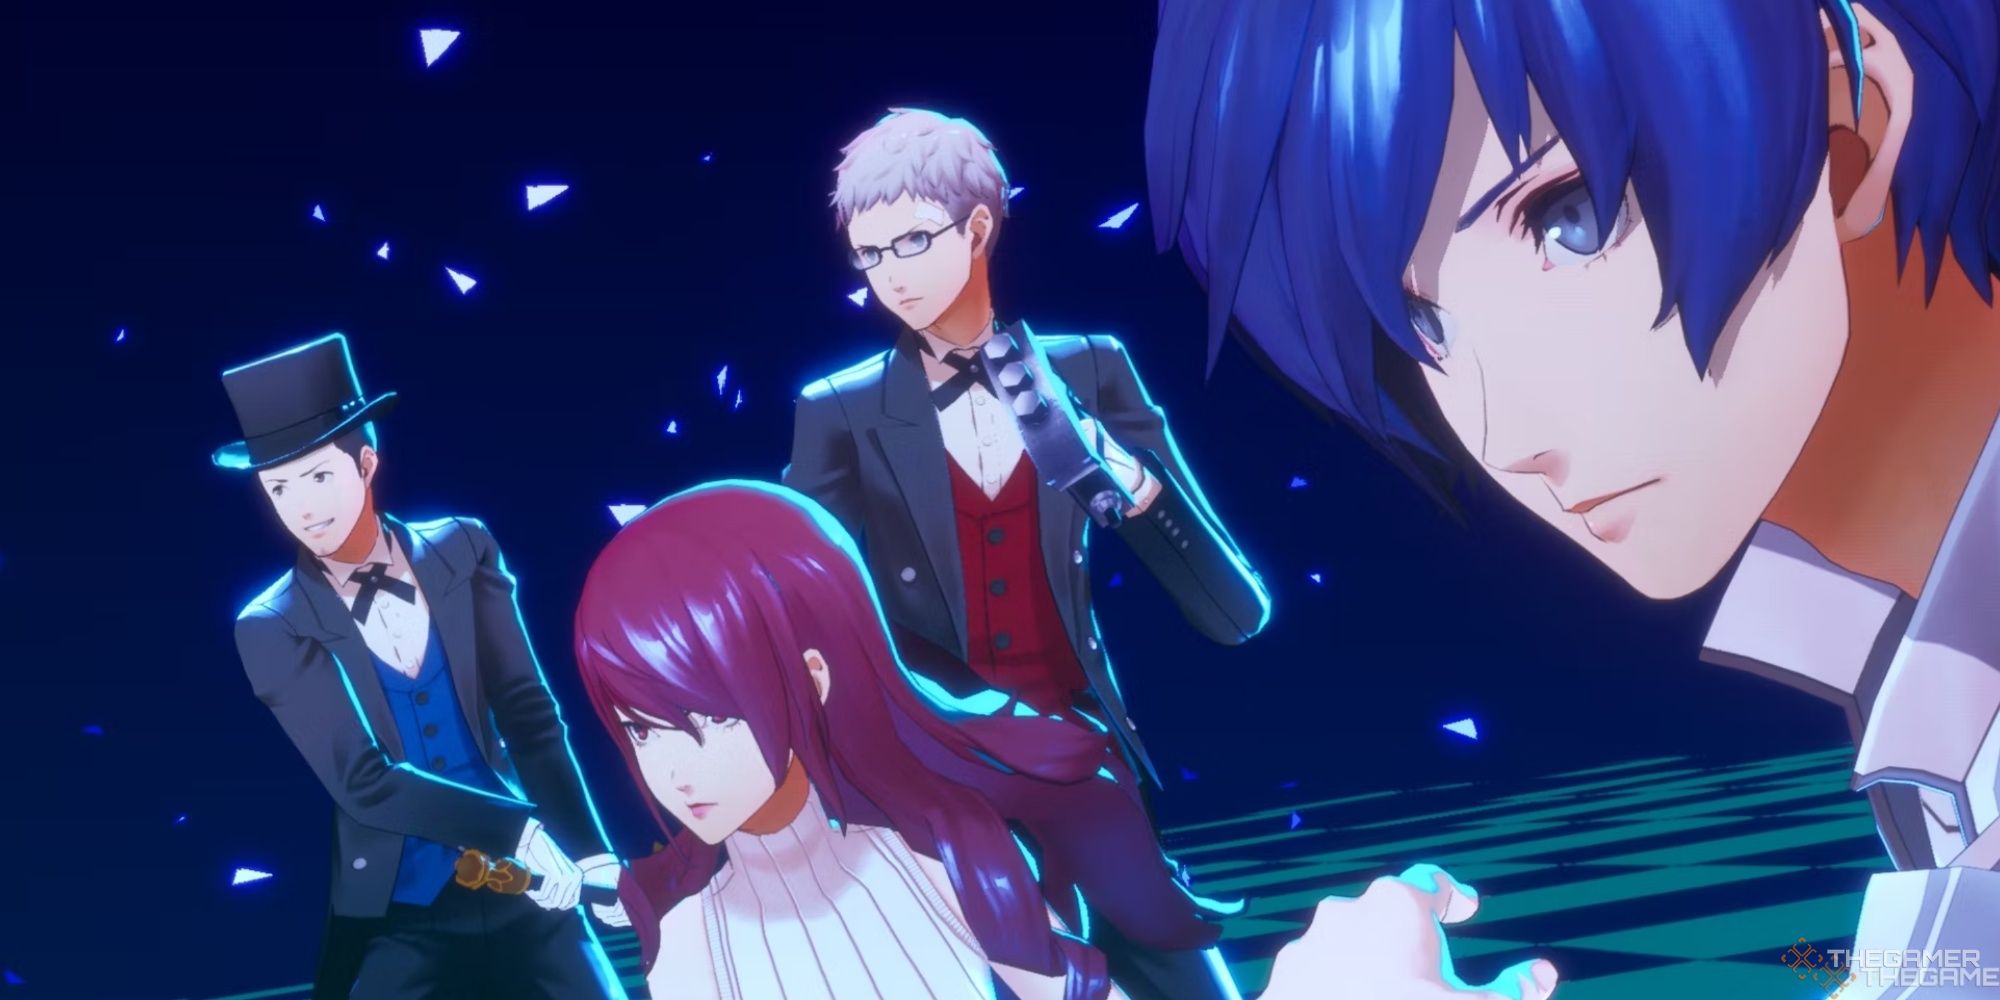 Persona 3 Reload - Makoto, Mitsuru, Junpei, and Akihiko in different outfits get ready for an All-Out Attack in Tartarus.